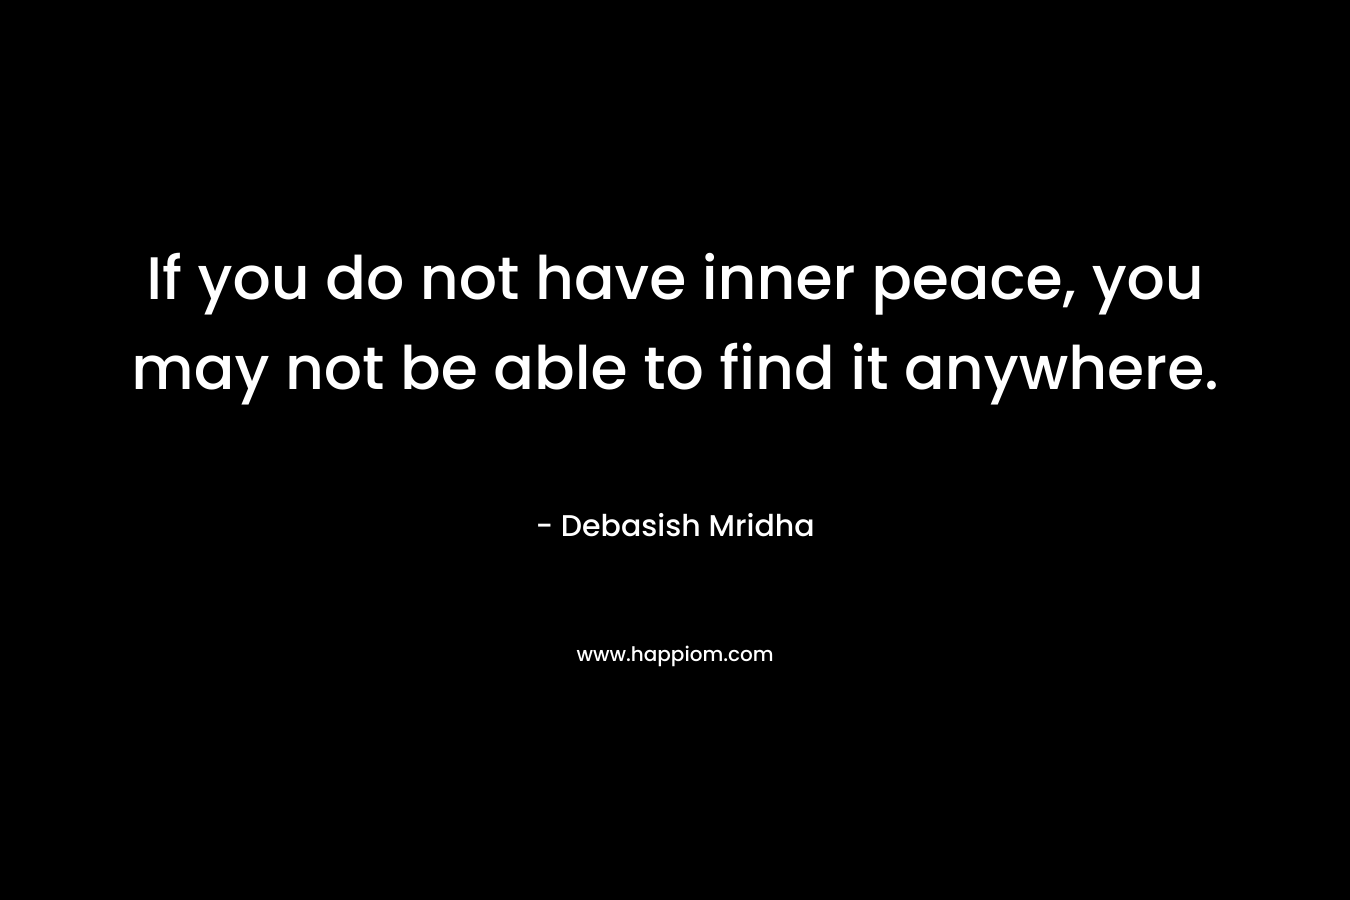 If you do not have inner peace, you may not be able to find it anywhere.